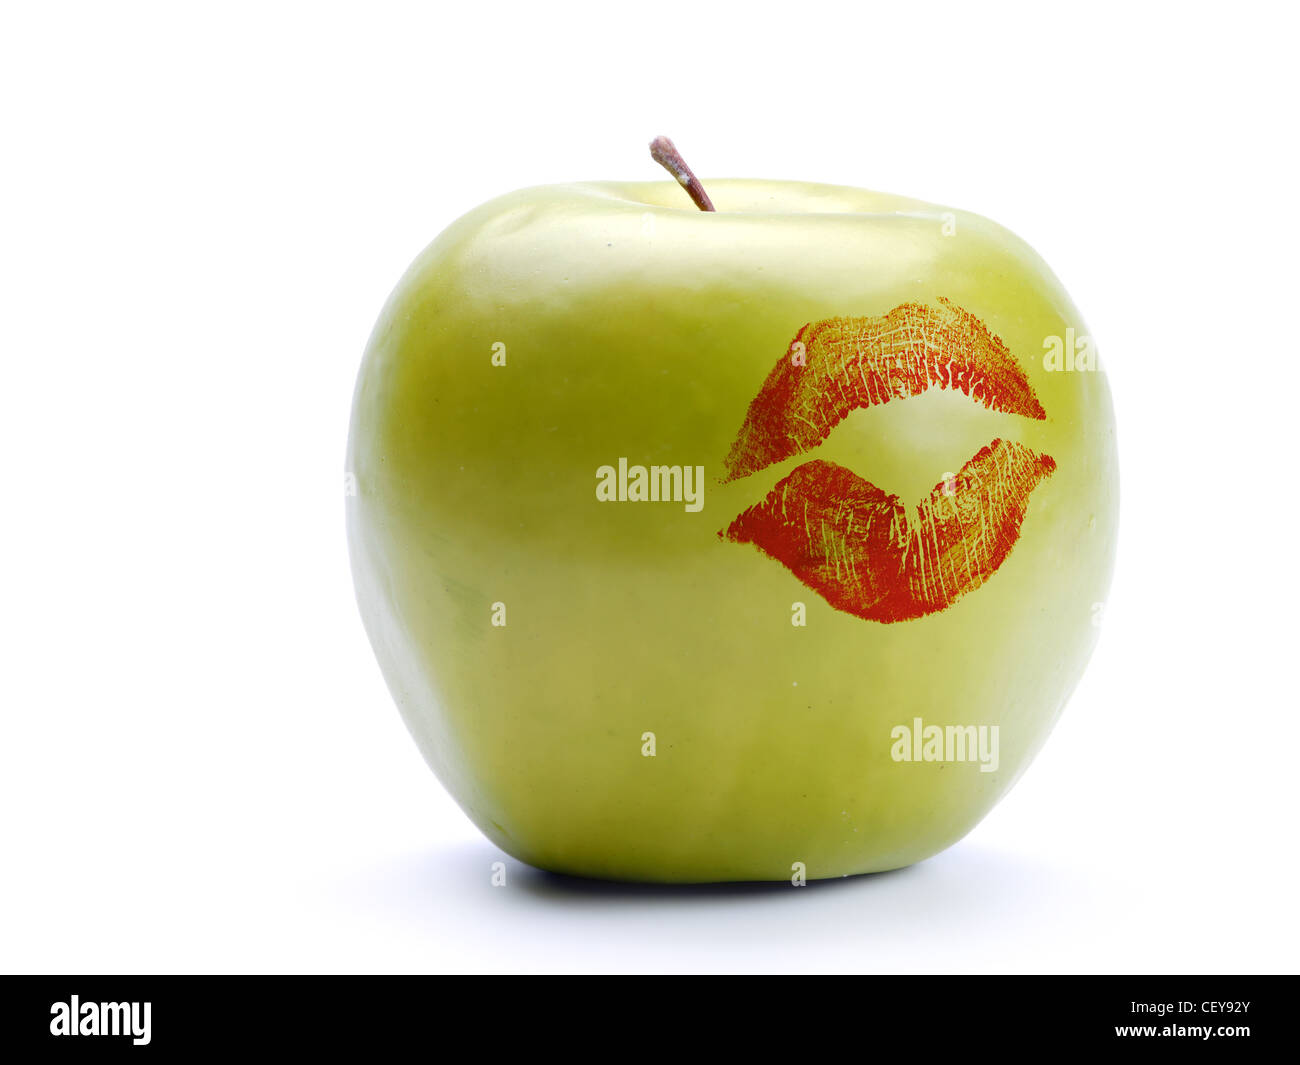 Green apple with red lipstick print shot on white background Stock Photo